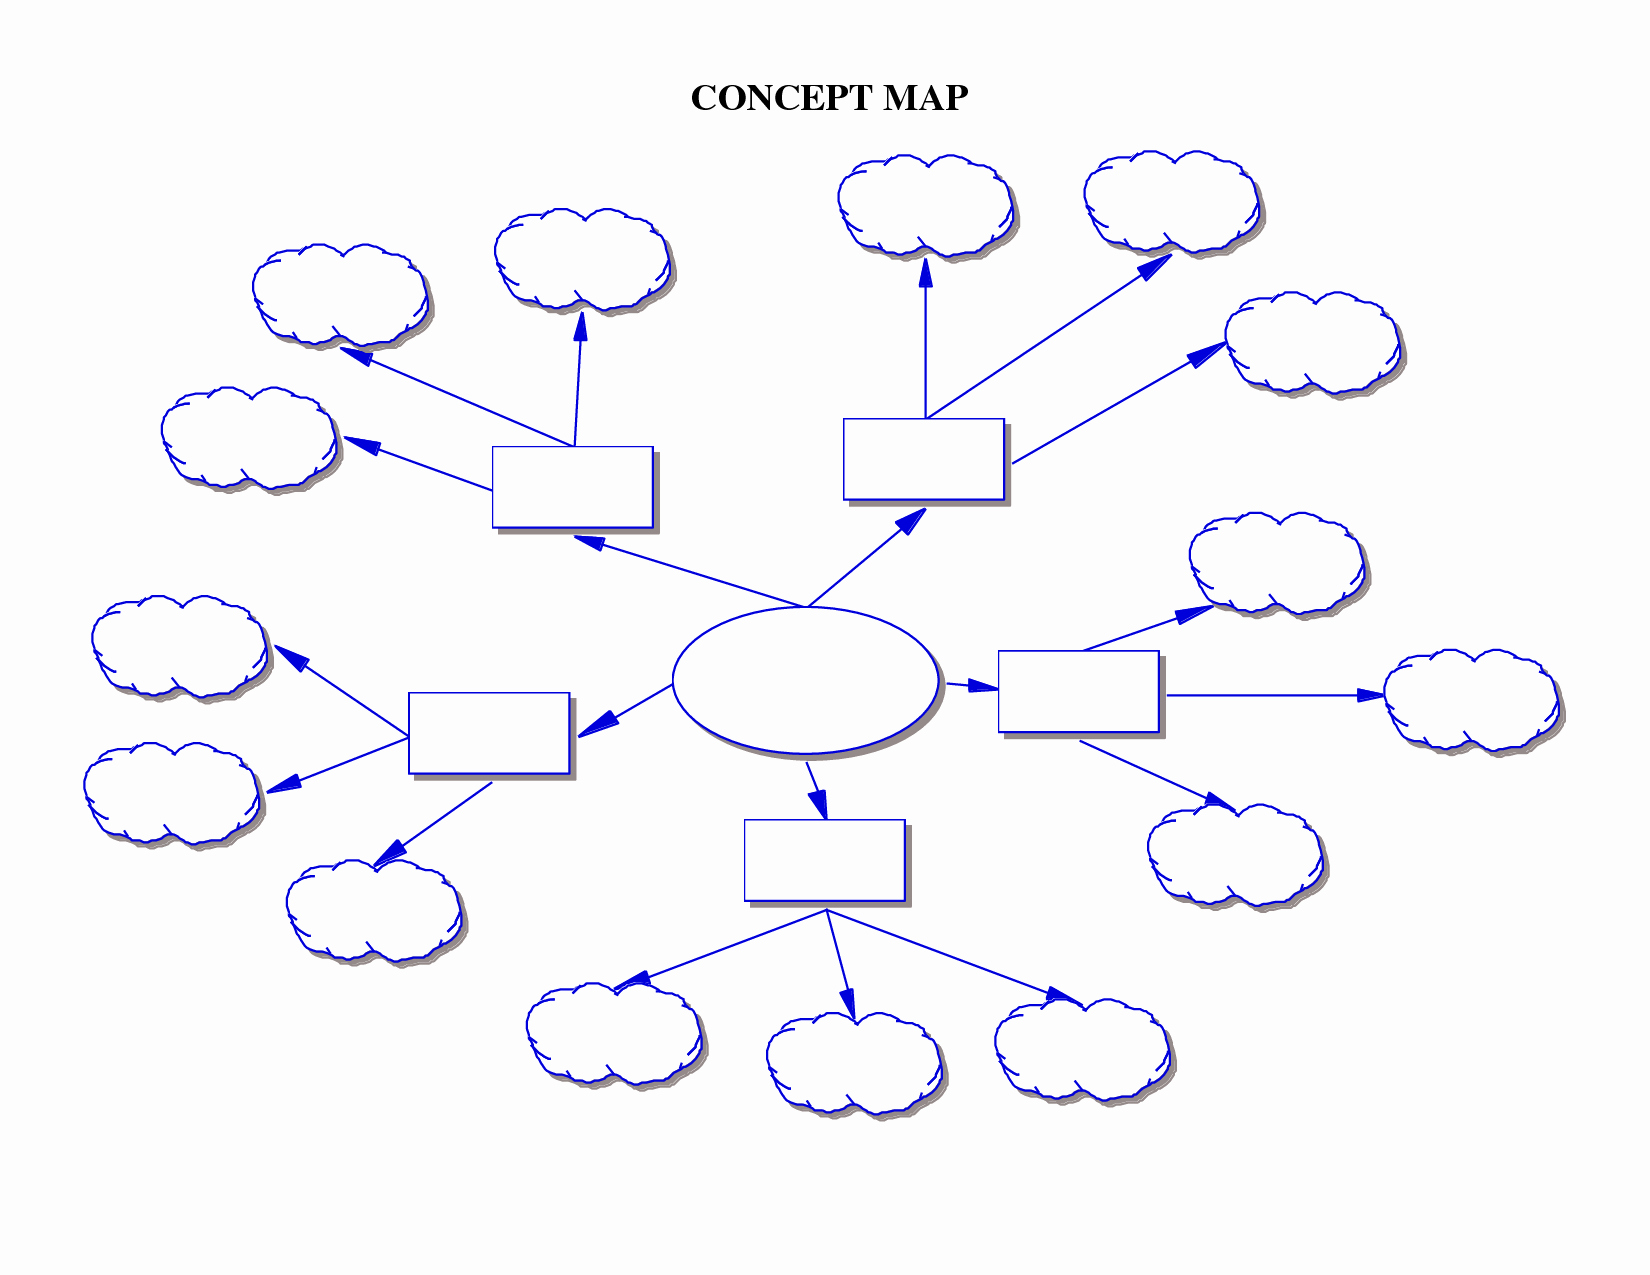 Blank Concept Map Template New Concept Map Template Teaching tools Pinterest